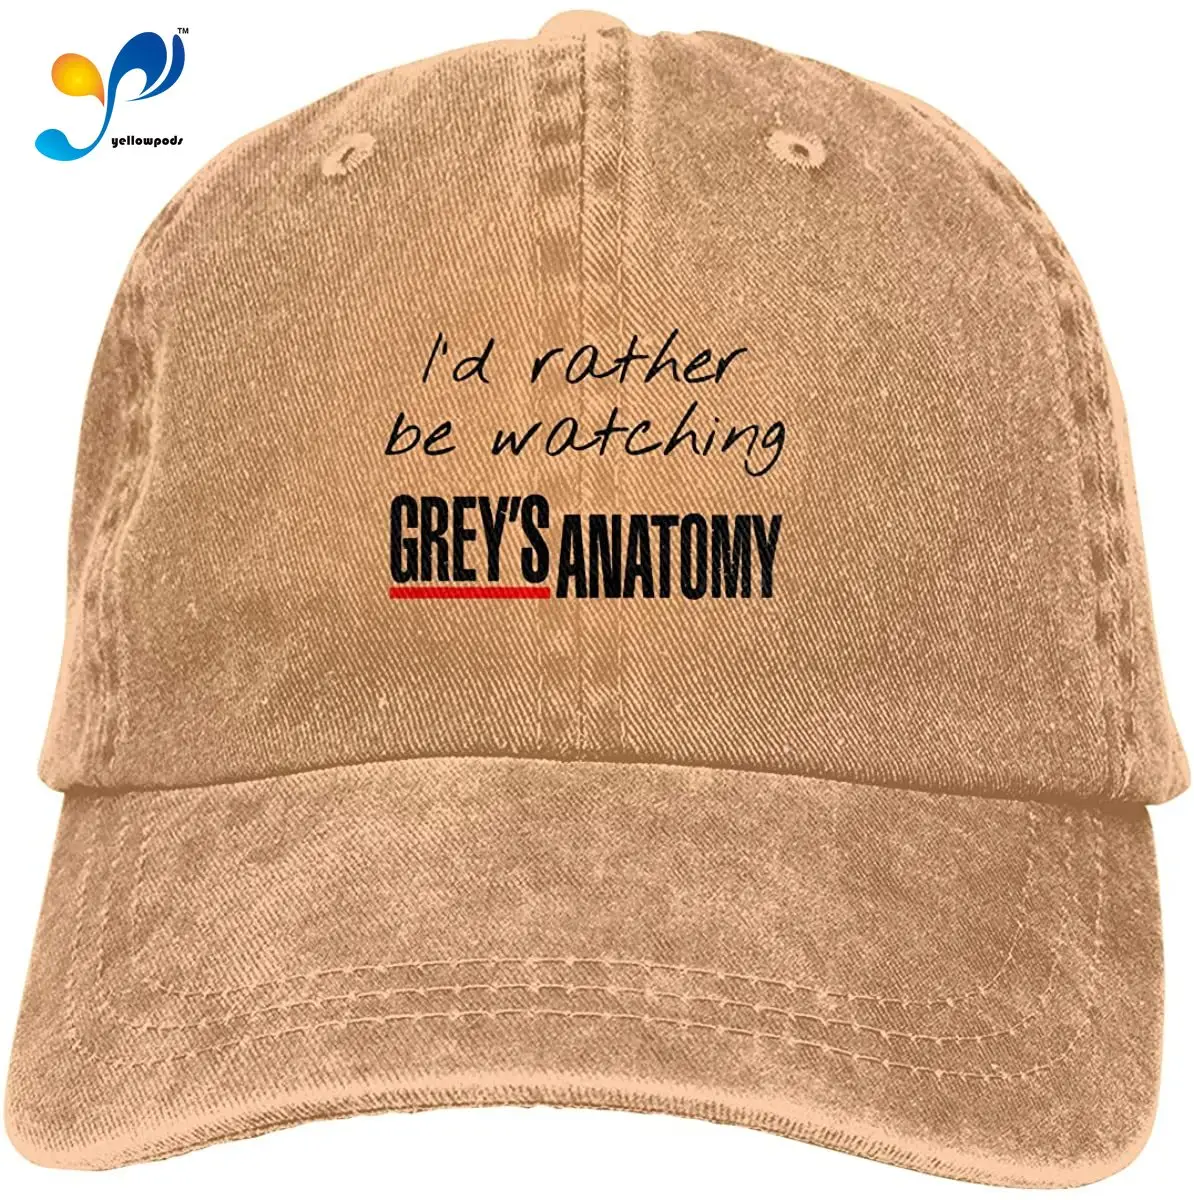 

I'd Rather Be Watching Anatomy Unisex Soft Casquette Cap Fashion Hat Vintage Adjustable Baseball Caps